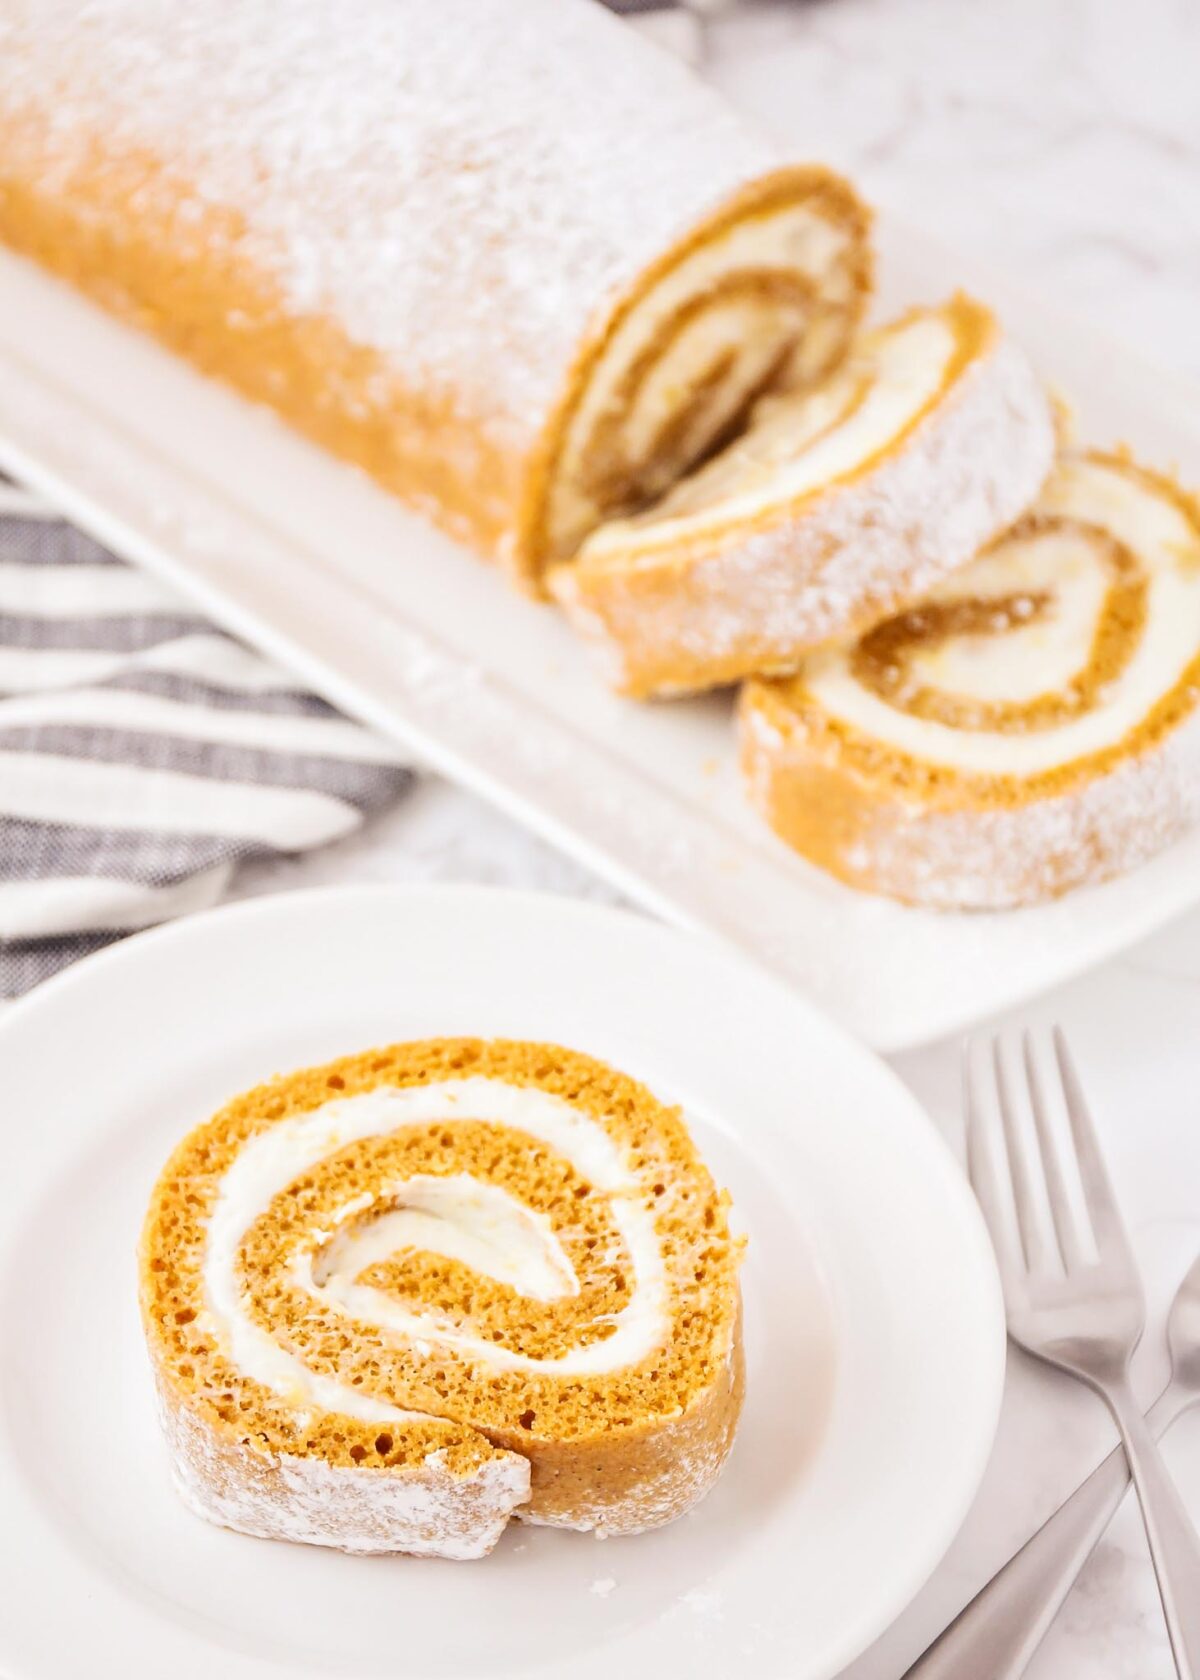 Pumpkin Roll with cream cheese filling sliced and served on a white plate.